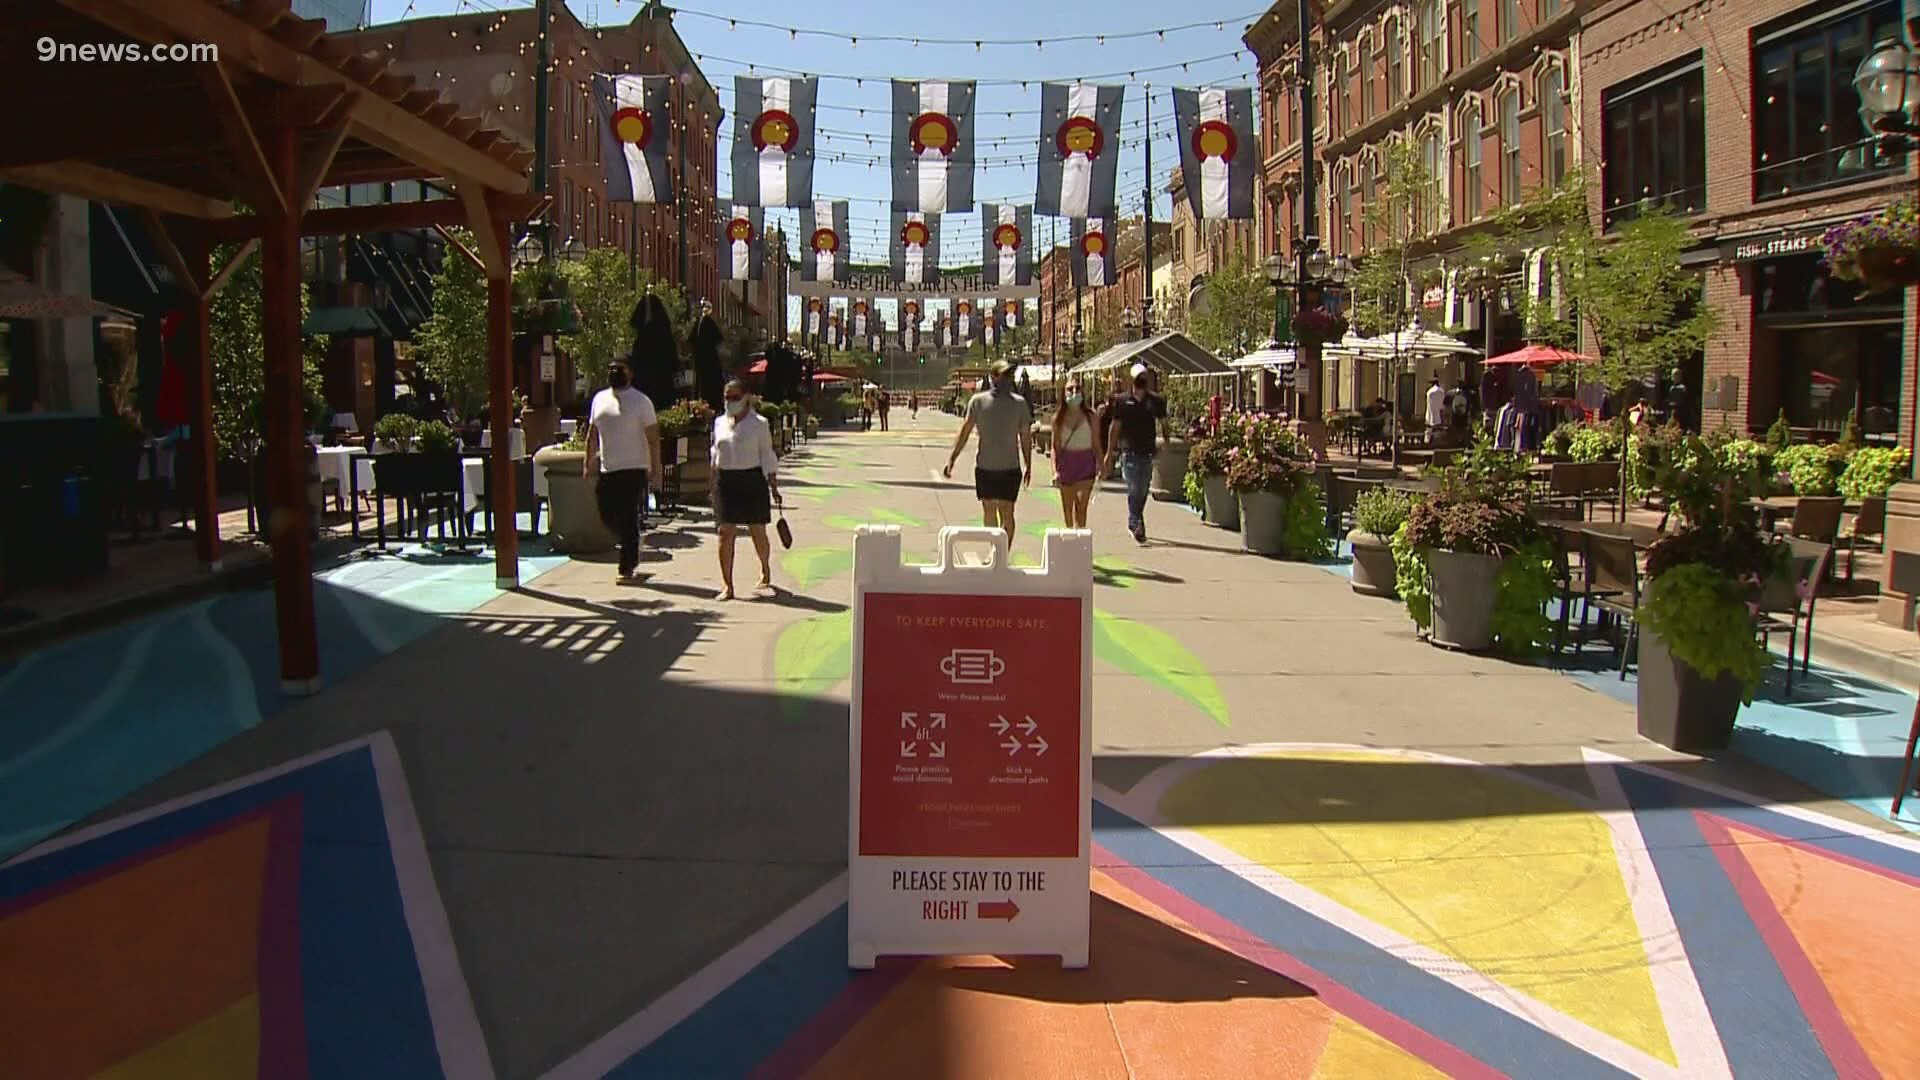 Certain streets in Denver are going to remain closed this summer for restaurant seating.